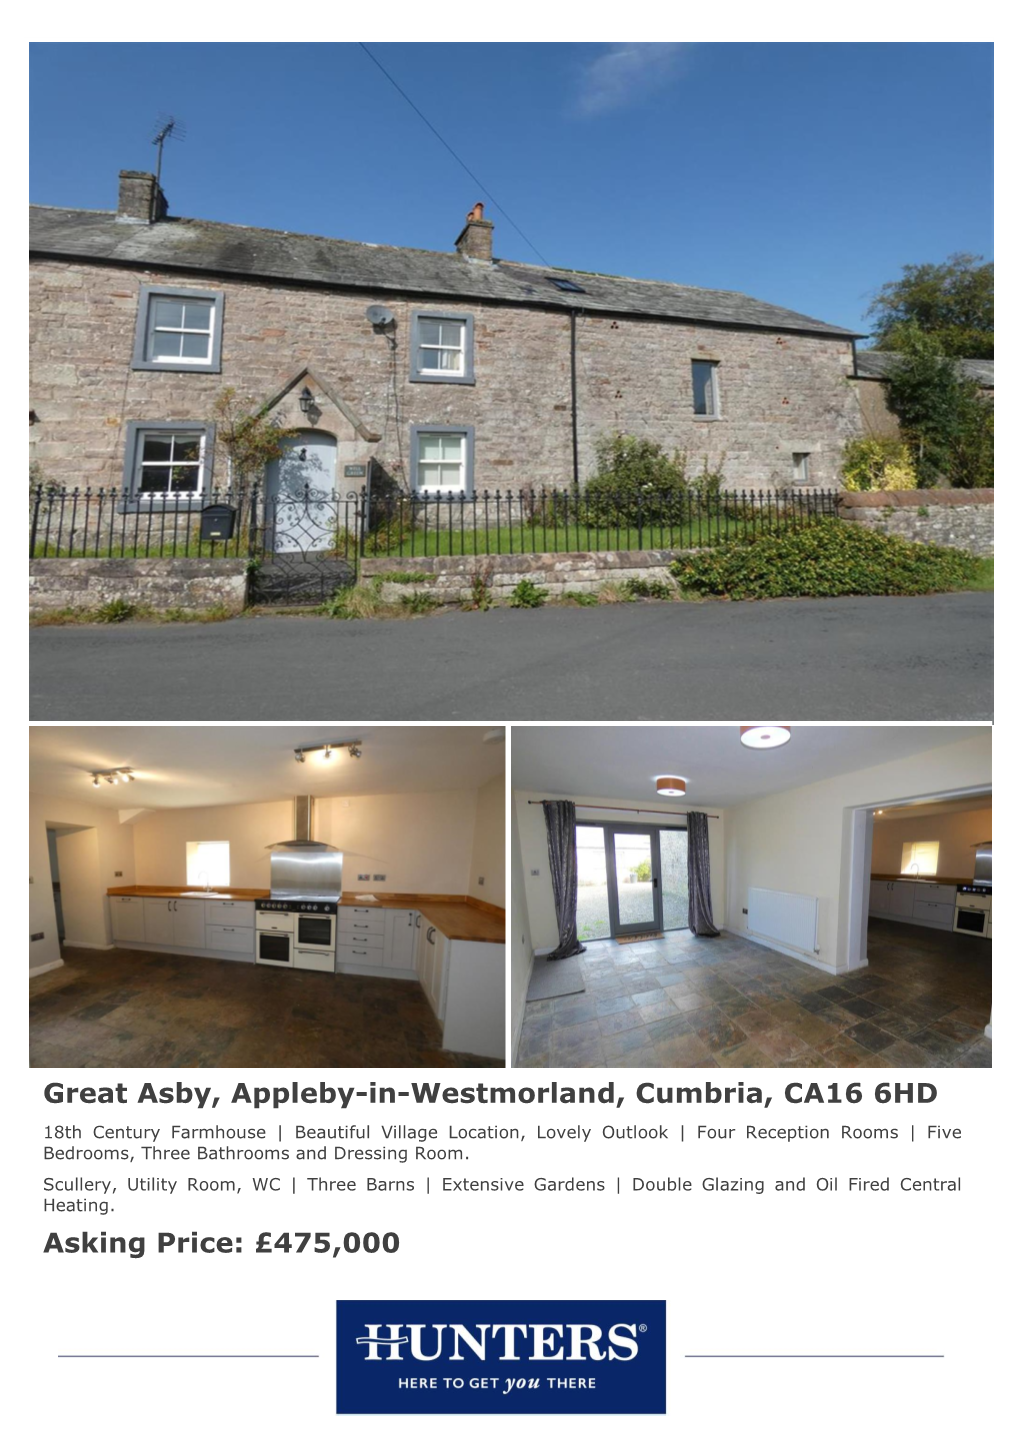 Great Asby, Appleby-In-Westmorland, Cumbria, CA16 6HD Asking Price